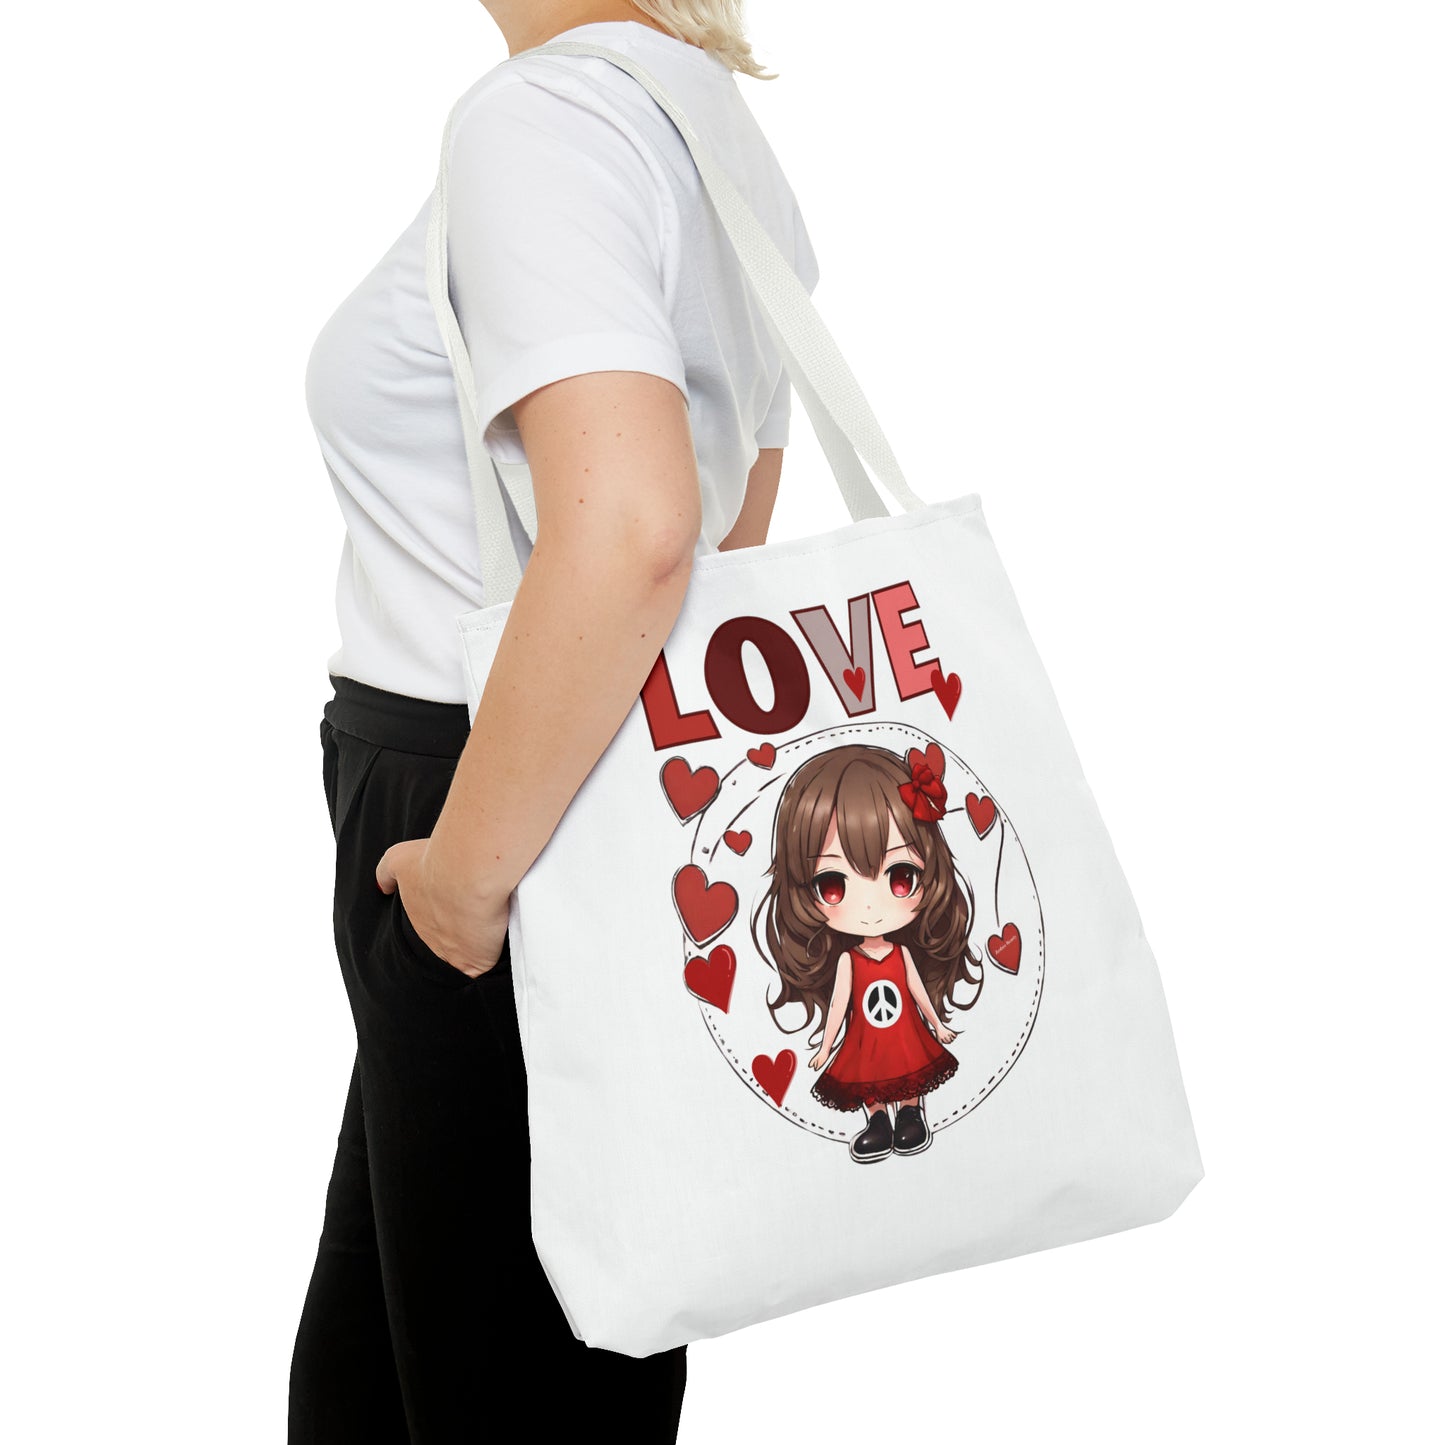 Valentine's Love cute trendy tote bag,bag for books, weekender bag tote, small craft tote bag, hippy bag, valentine's gift for her